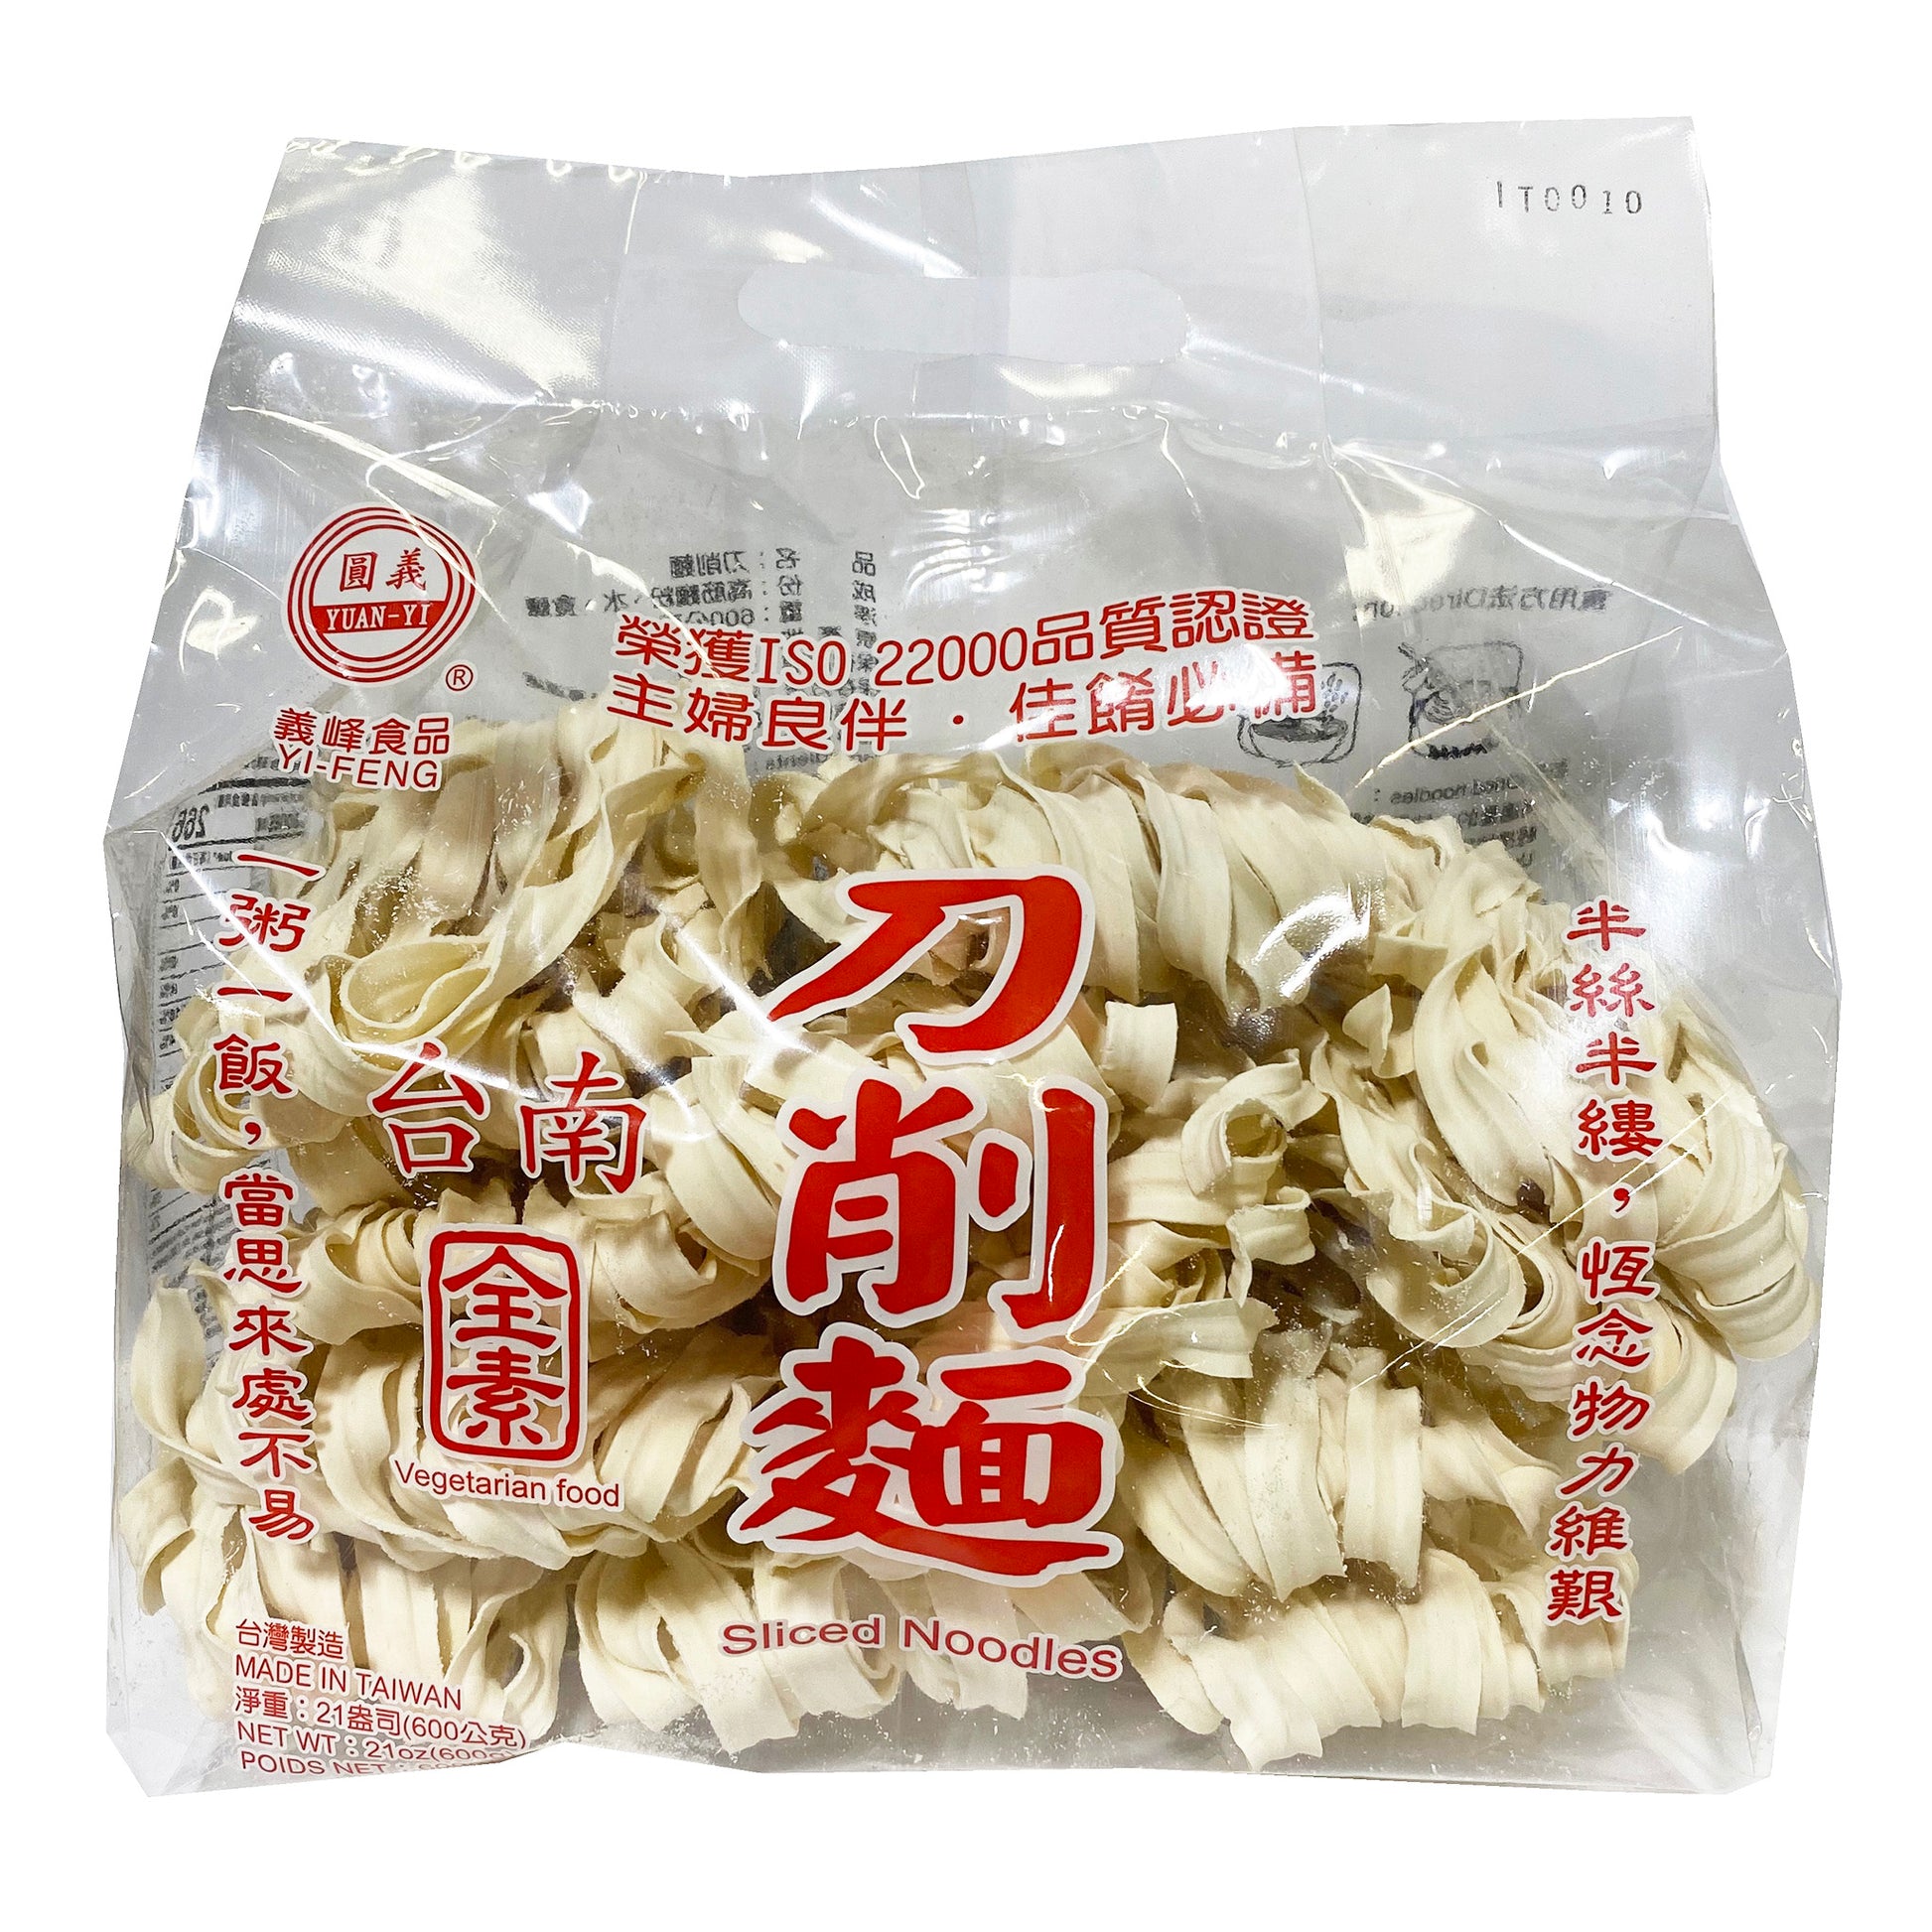 Front graphic image of Yuan Yi Sliced Noodles 21oz